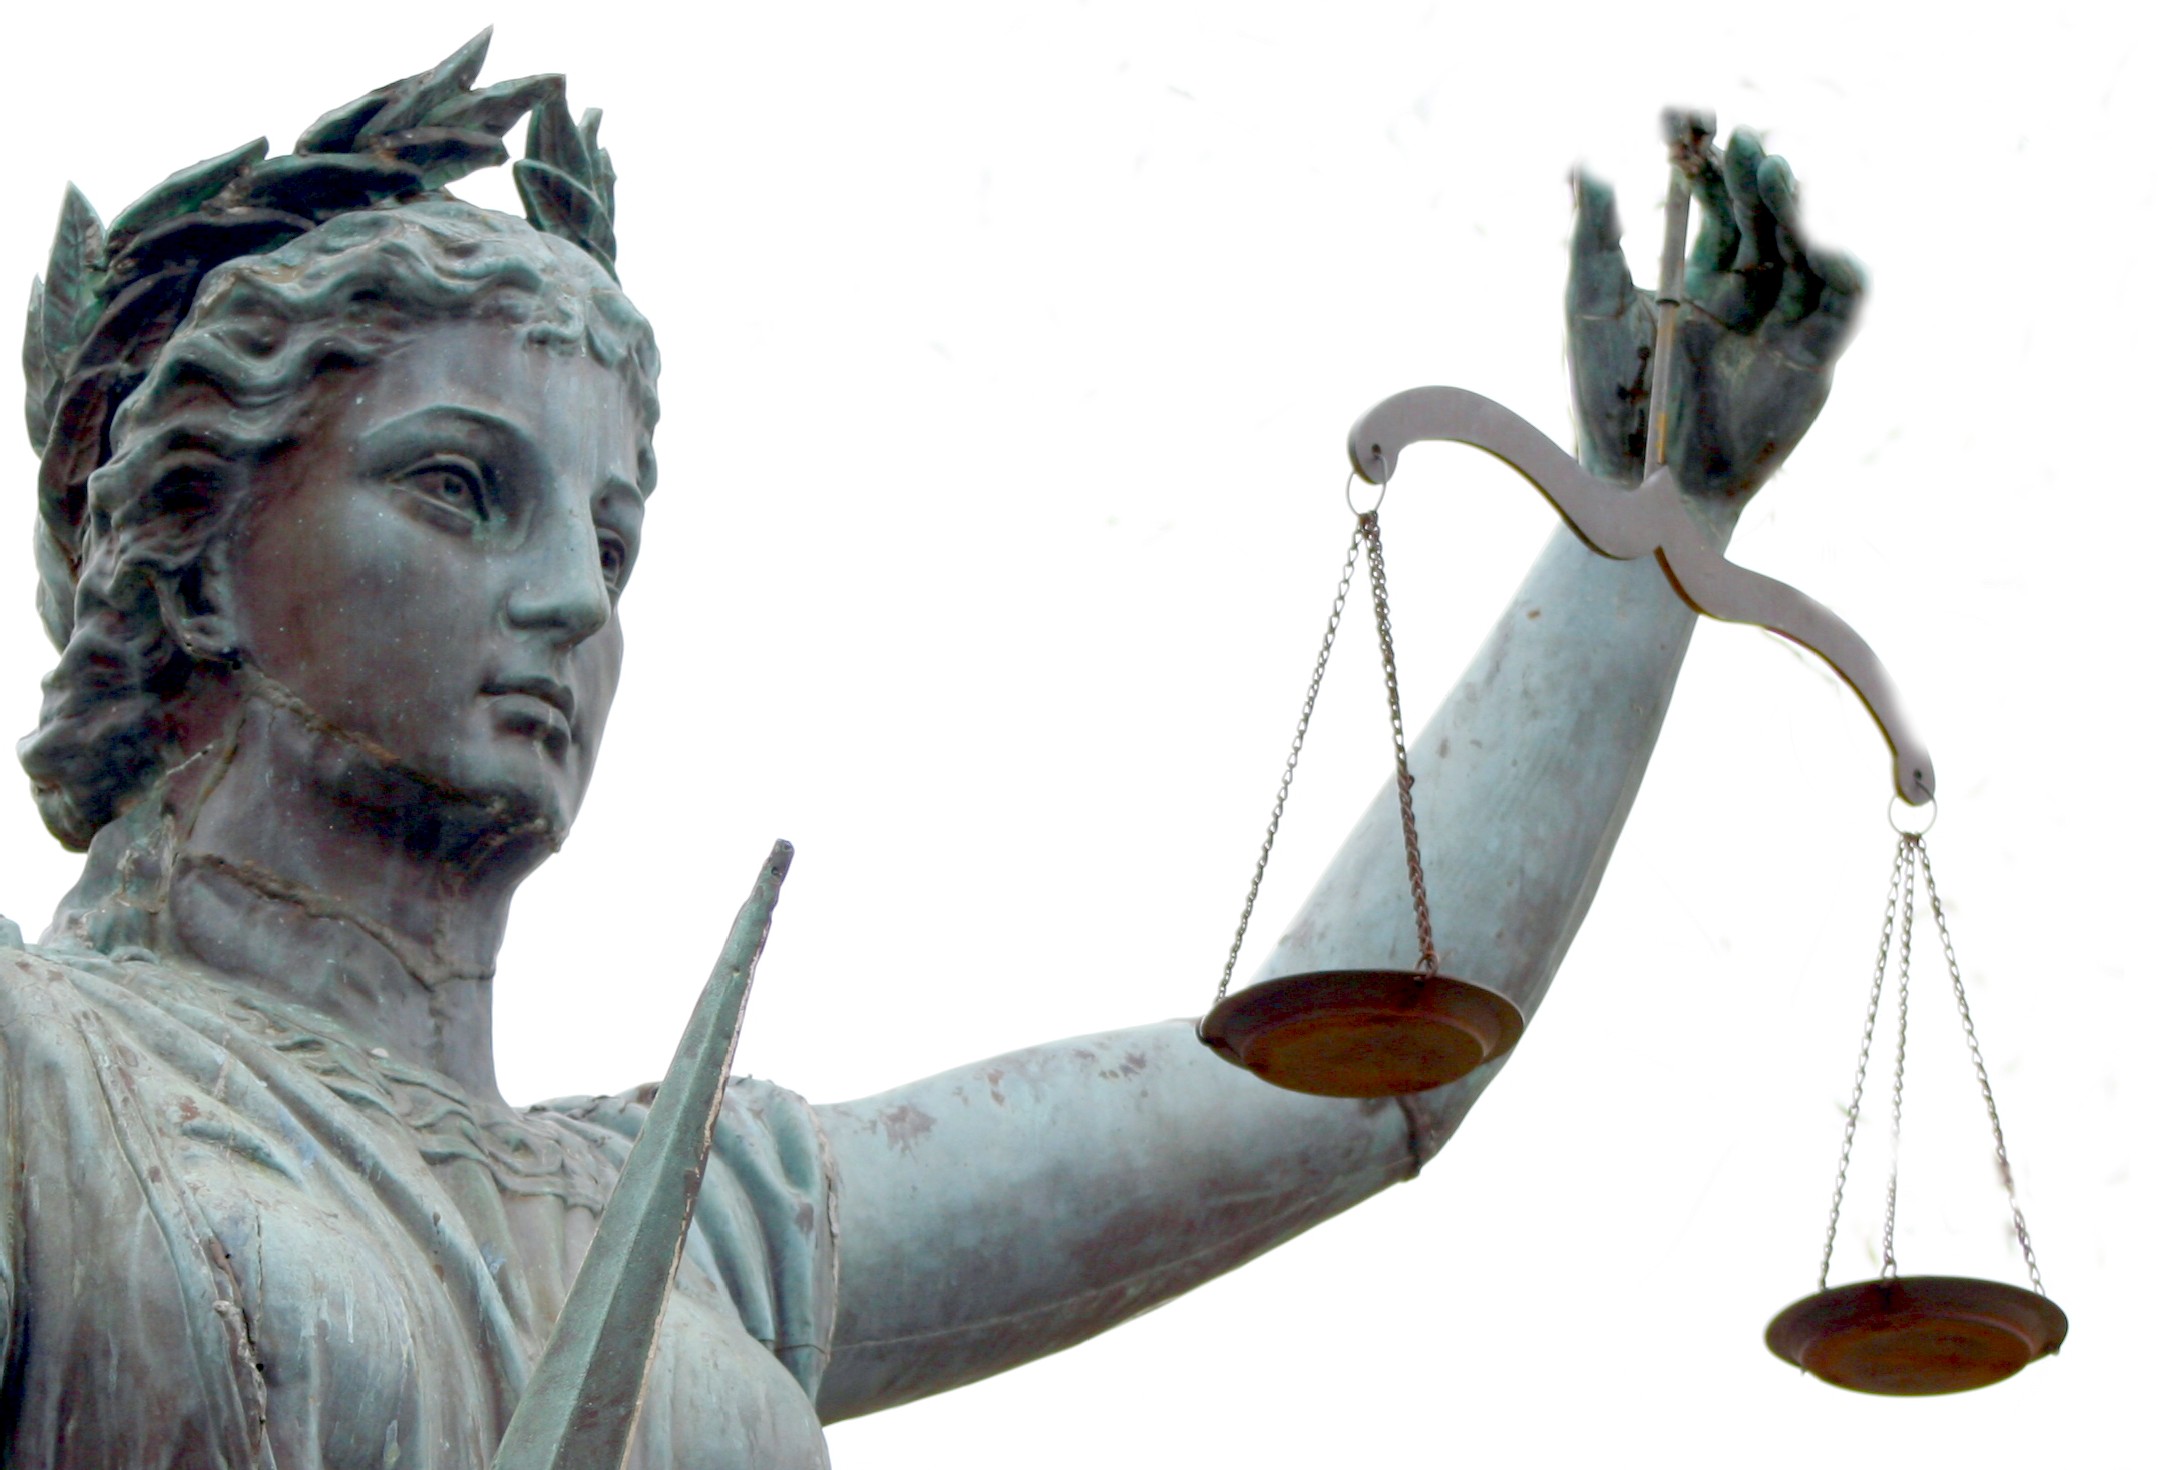 A statue of Justice holding scales in balance.